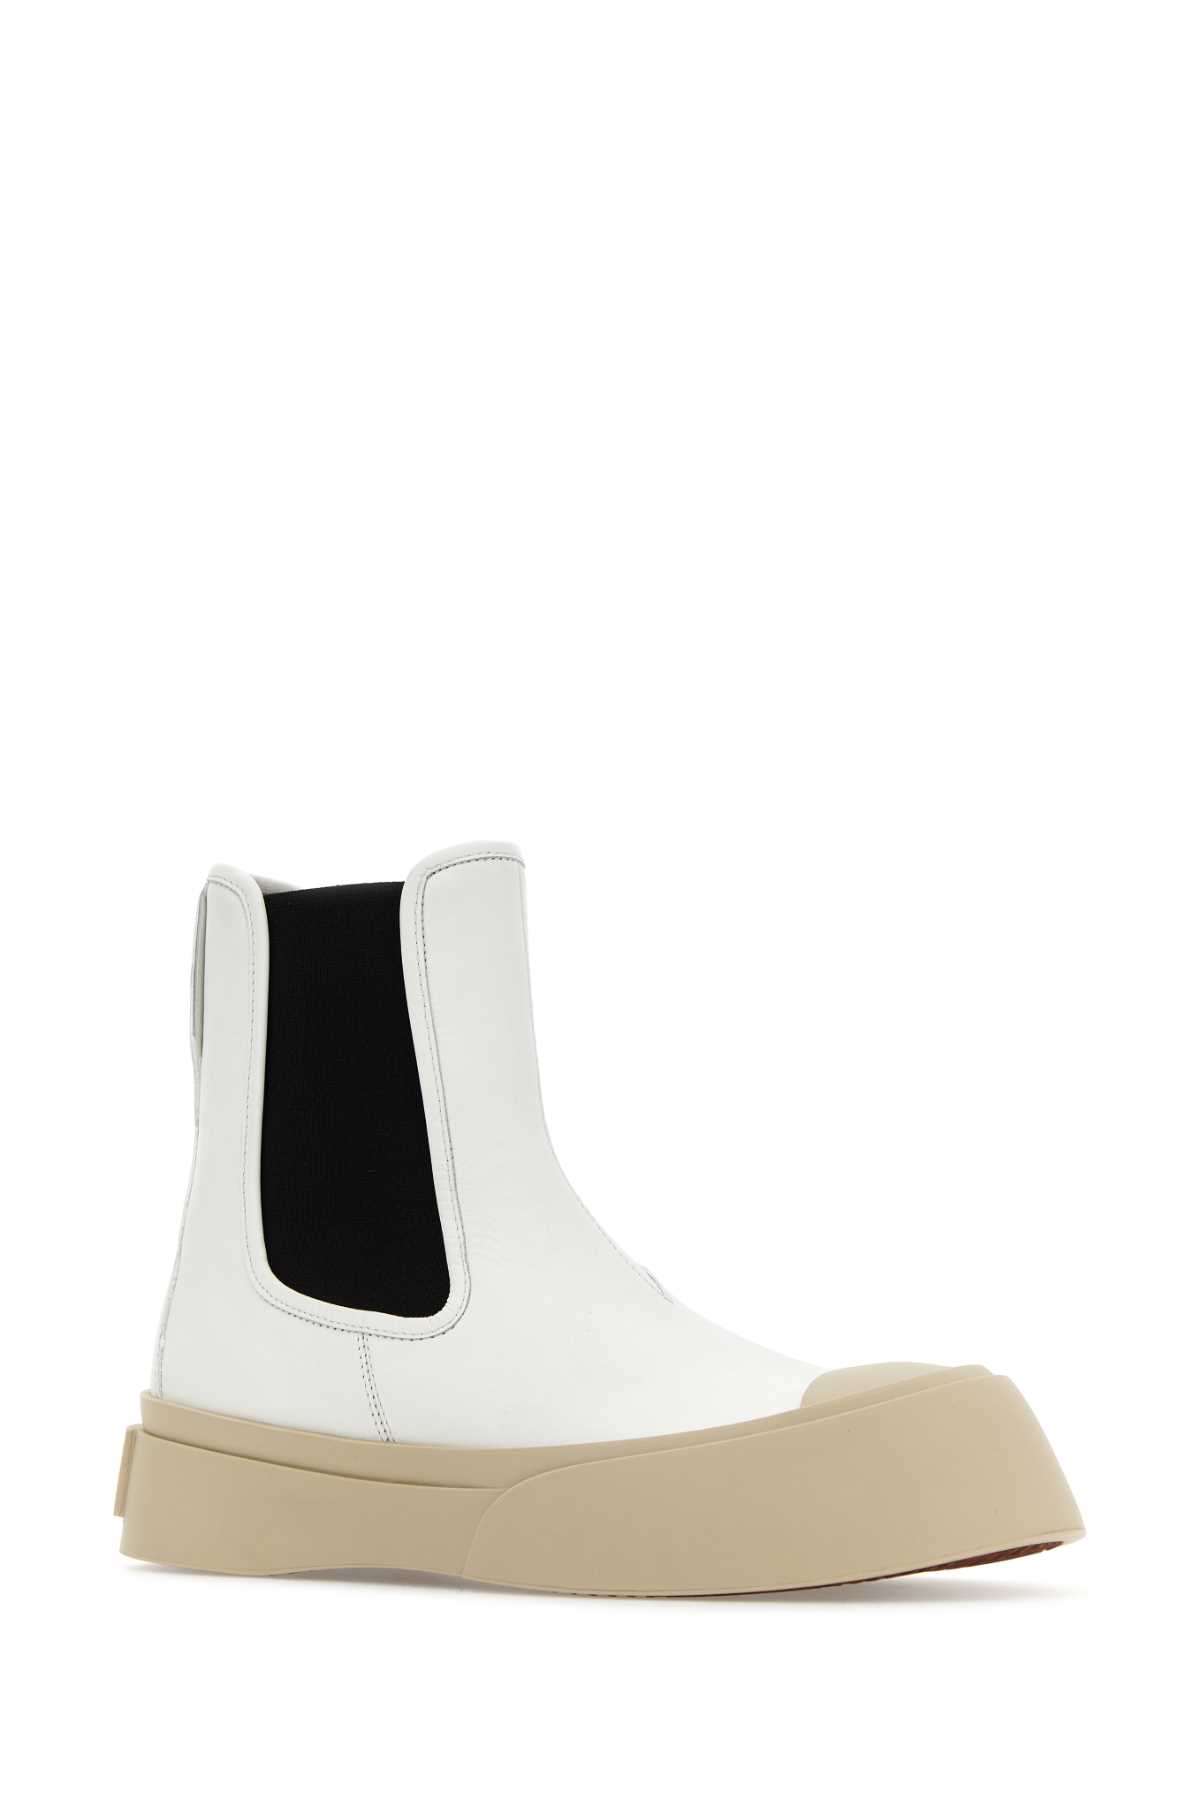 Marni White Nappa Leather Pablo Ankle Boots In Lilywhite